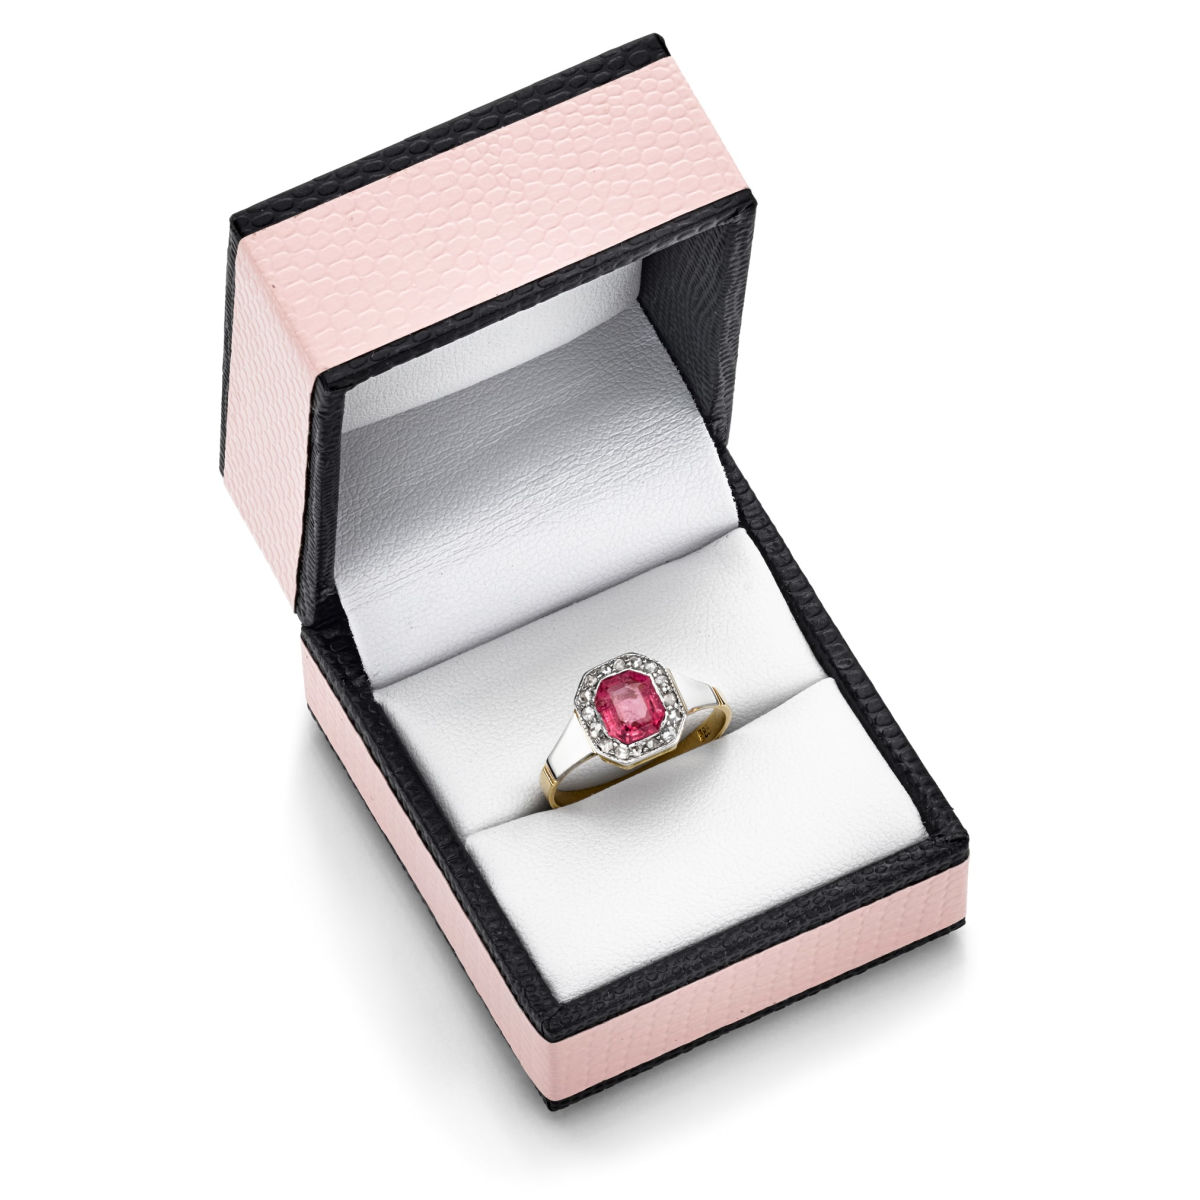 Art Deco entourage ring with pink tourmaline and diamond roses  - Image 2 of 2